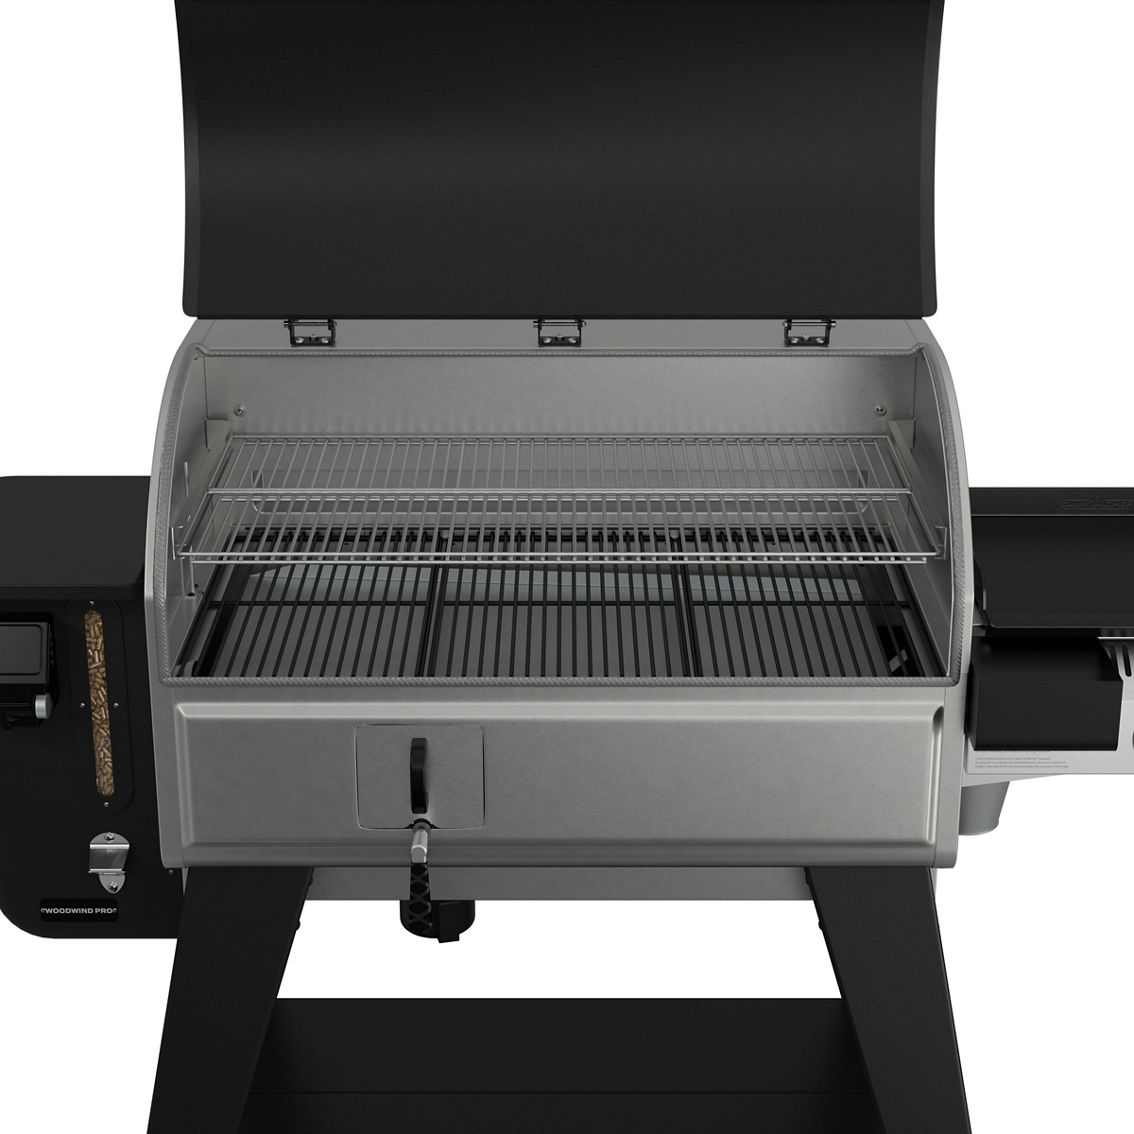 Camp Chef Woodwind Pro WiFi 36 Pellet Grill - Image 4 of 8